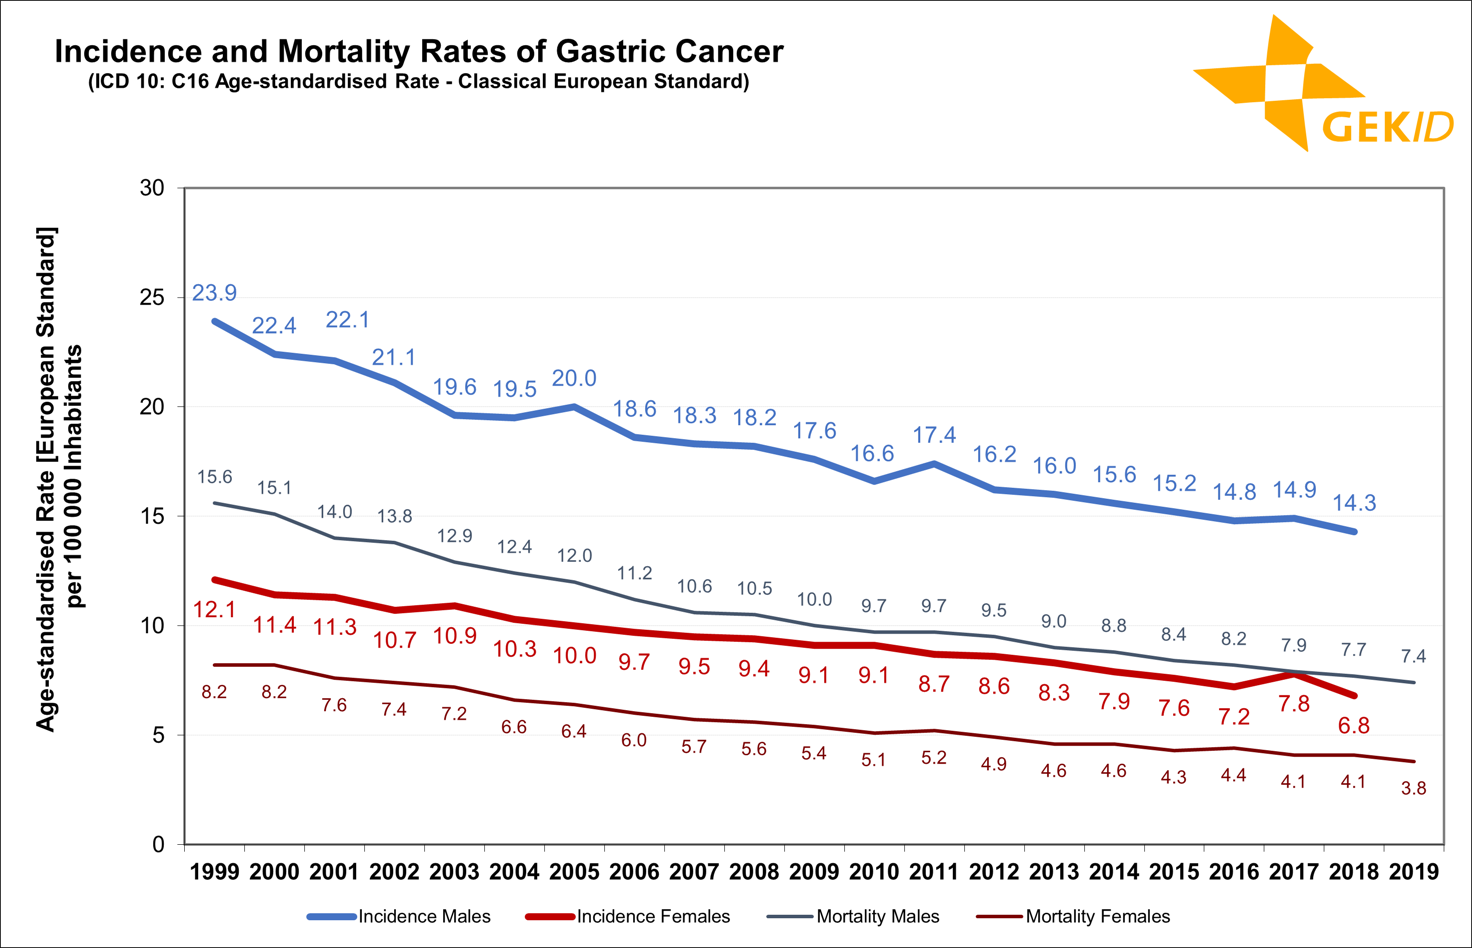 Estimated incidence and mortality rates of gastric cancer (ICD 10: C16) in Germany - age-standardized rates (old European standard) 1